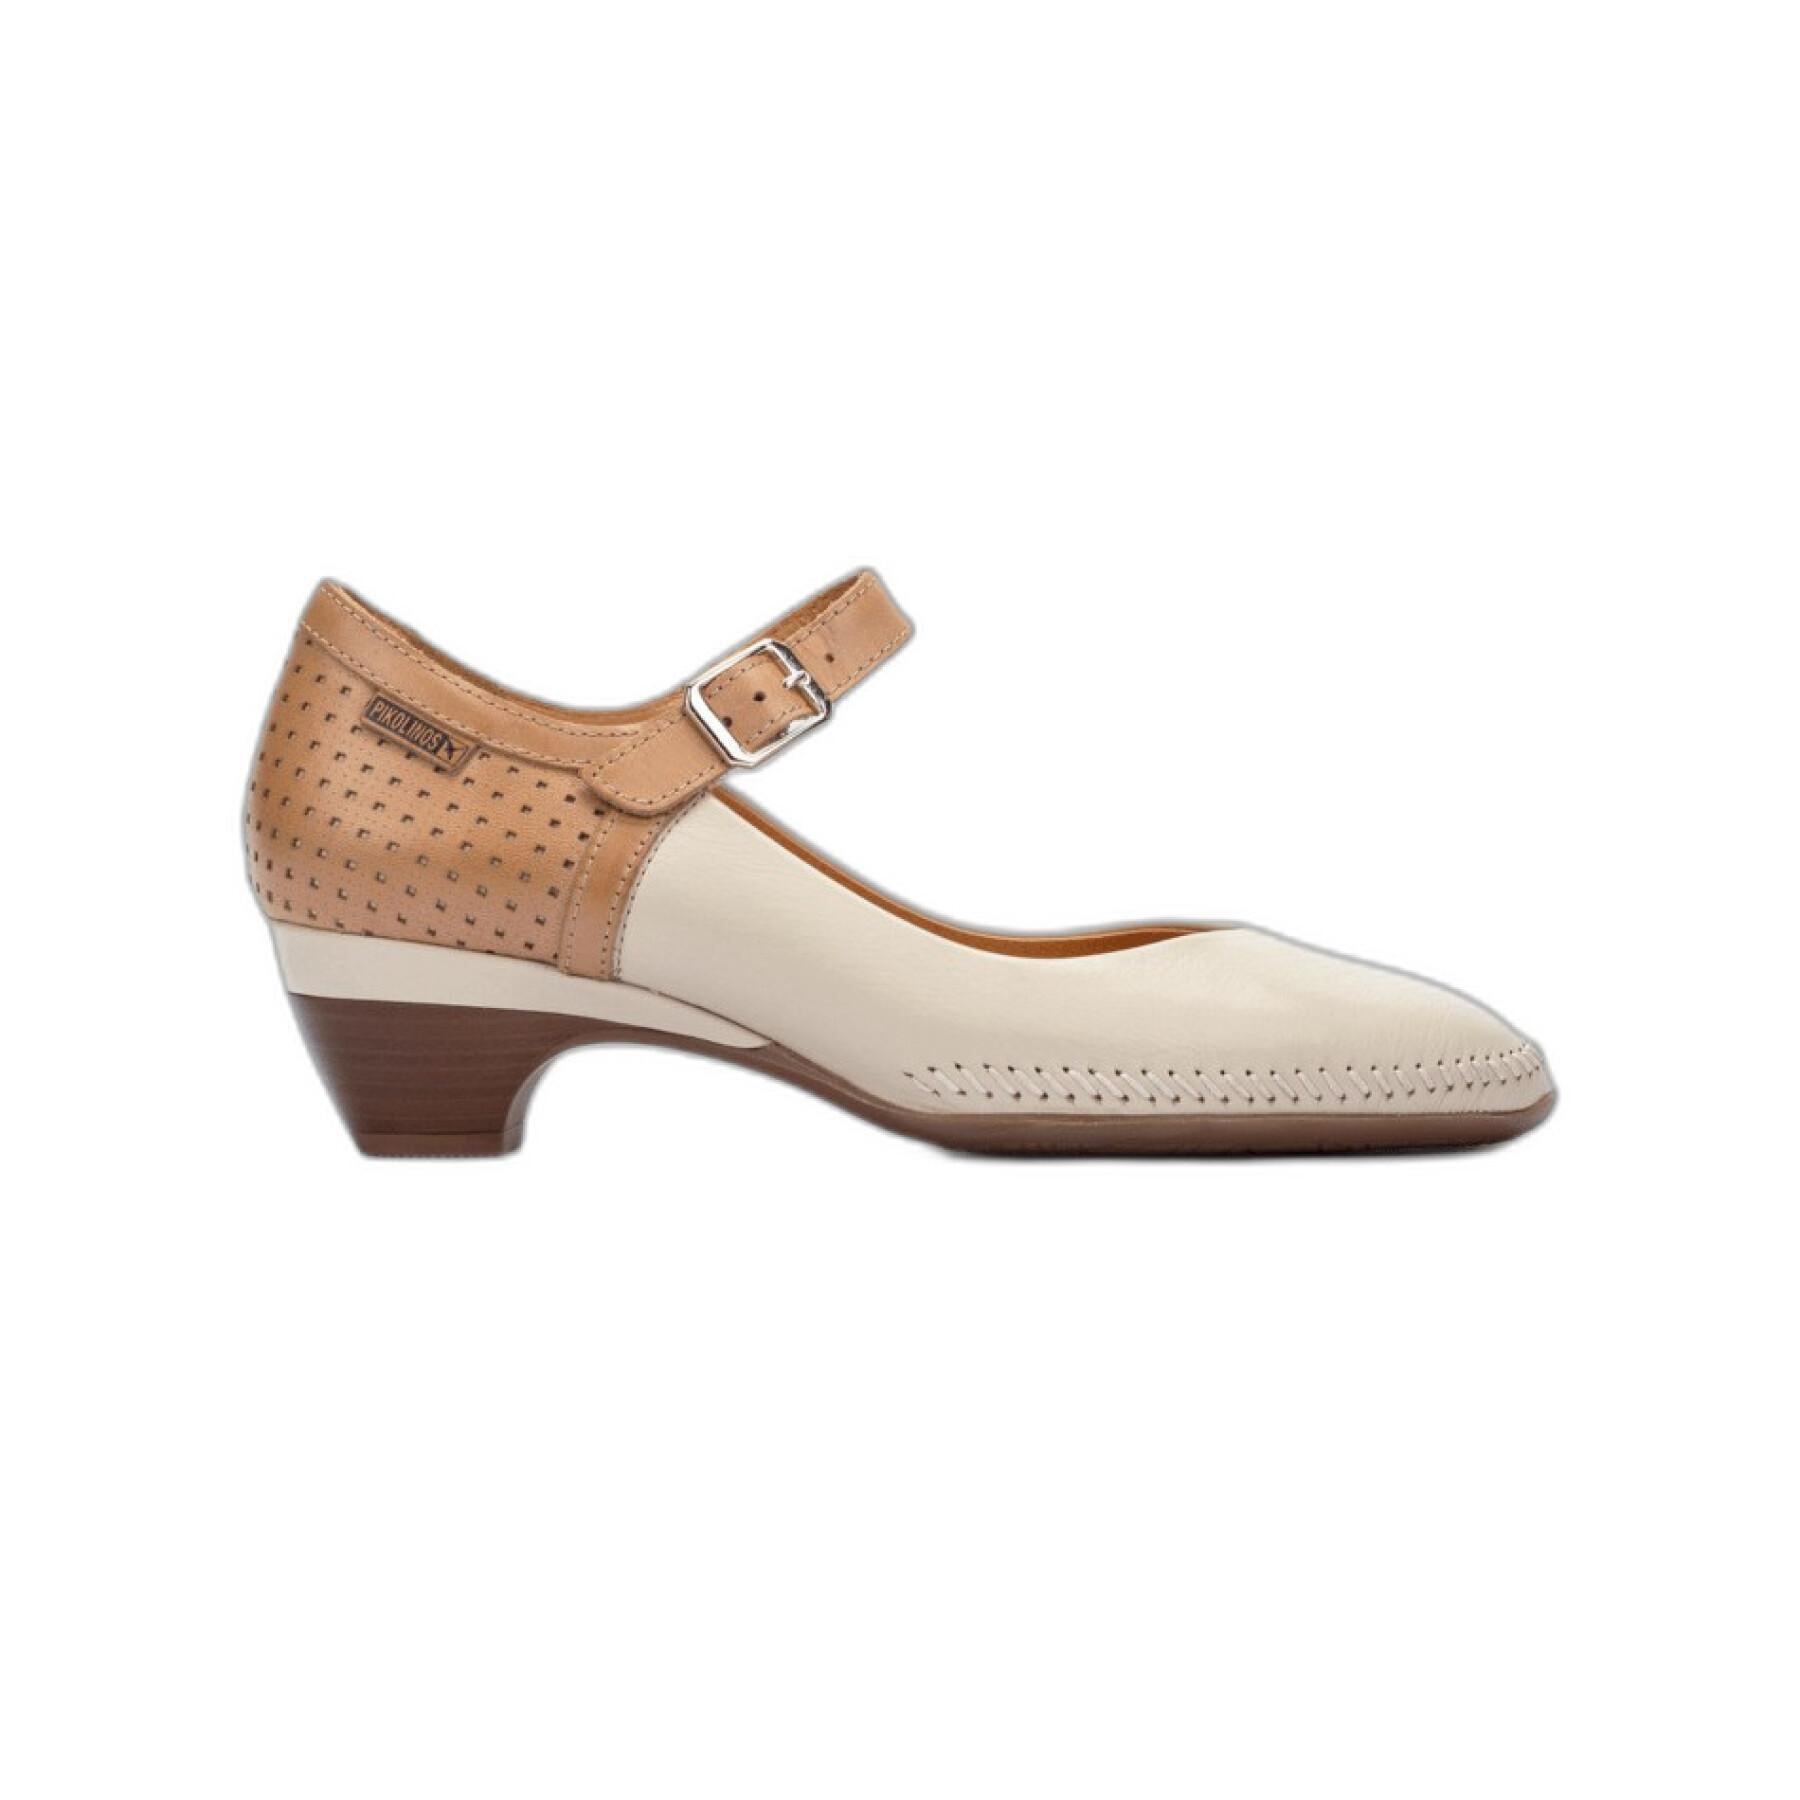 Women's shoes Pikolinos Figueres